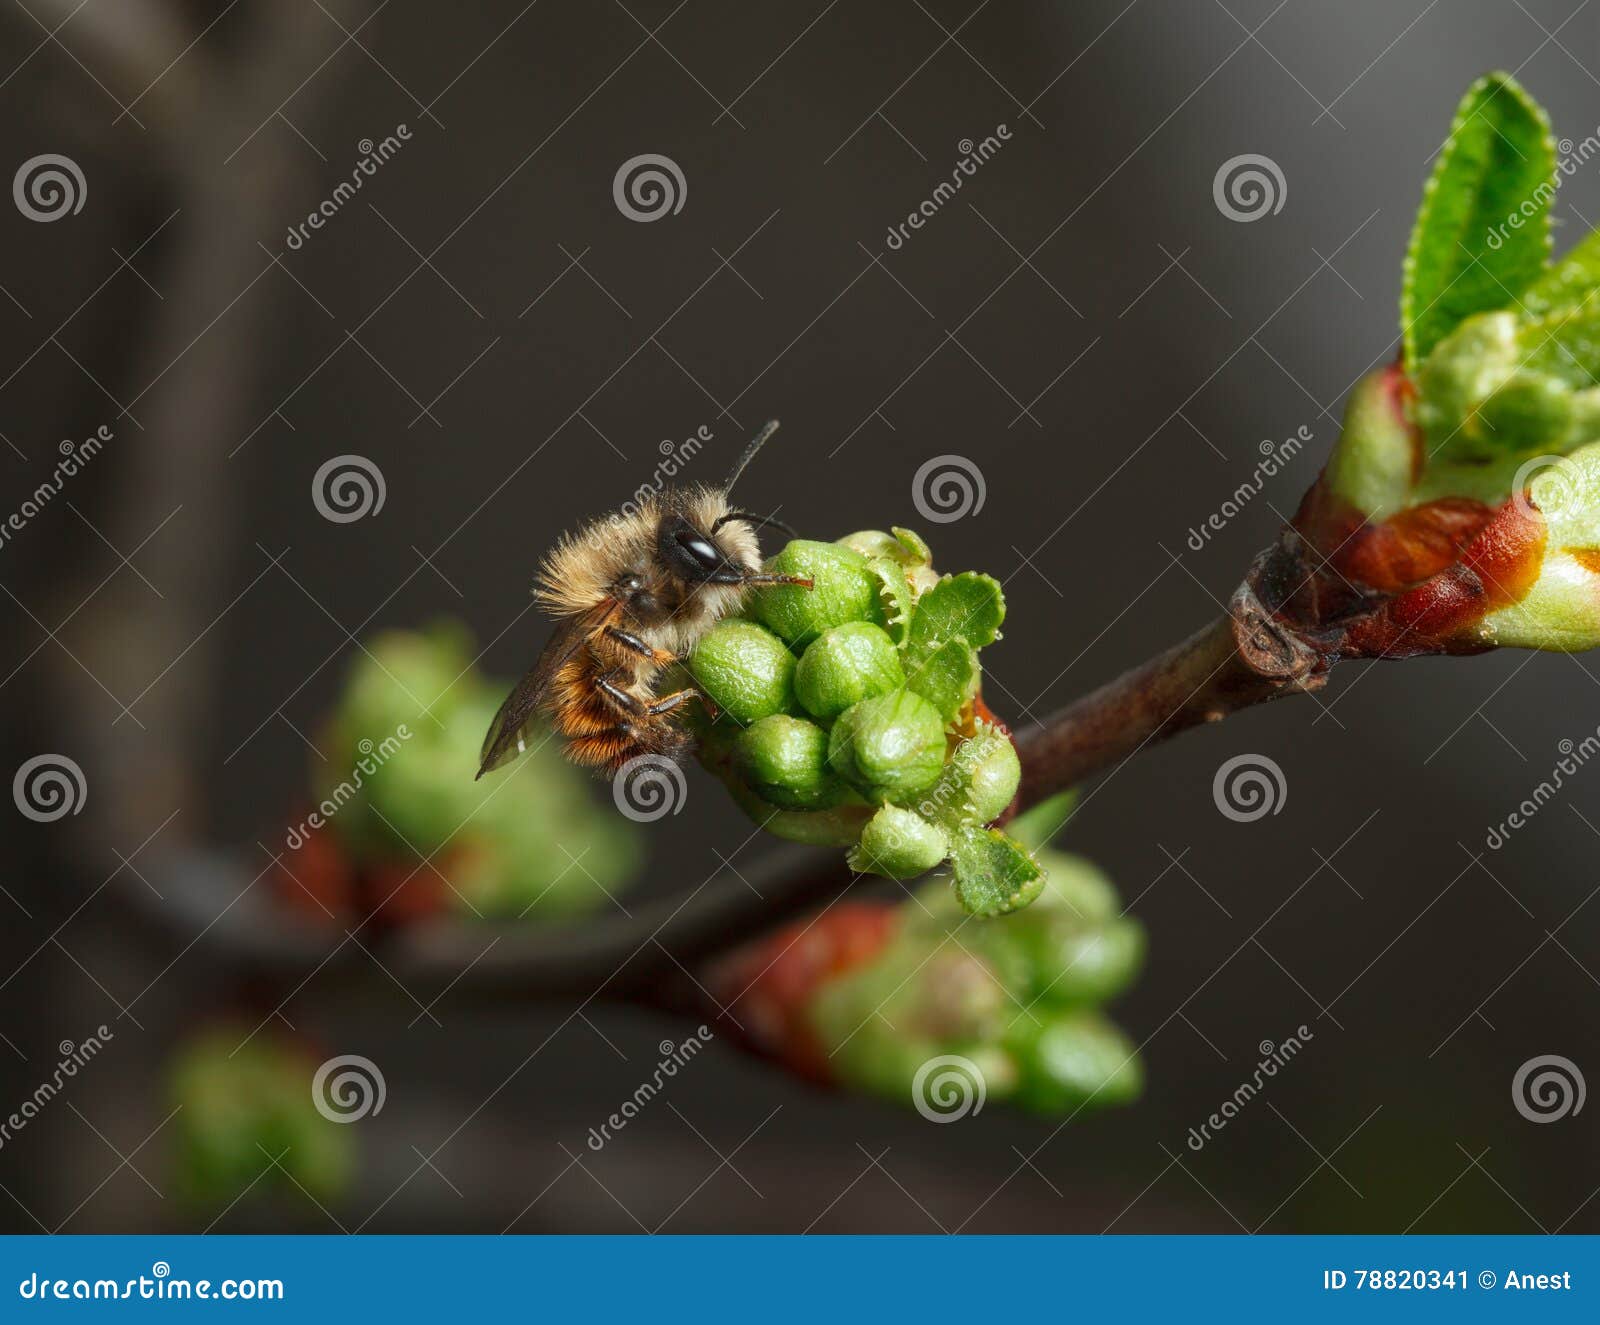 cherry unfold flower buds and early bee